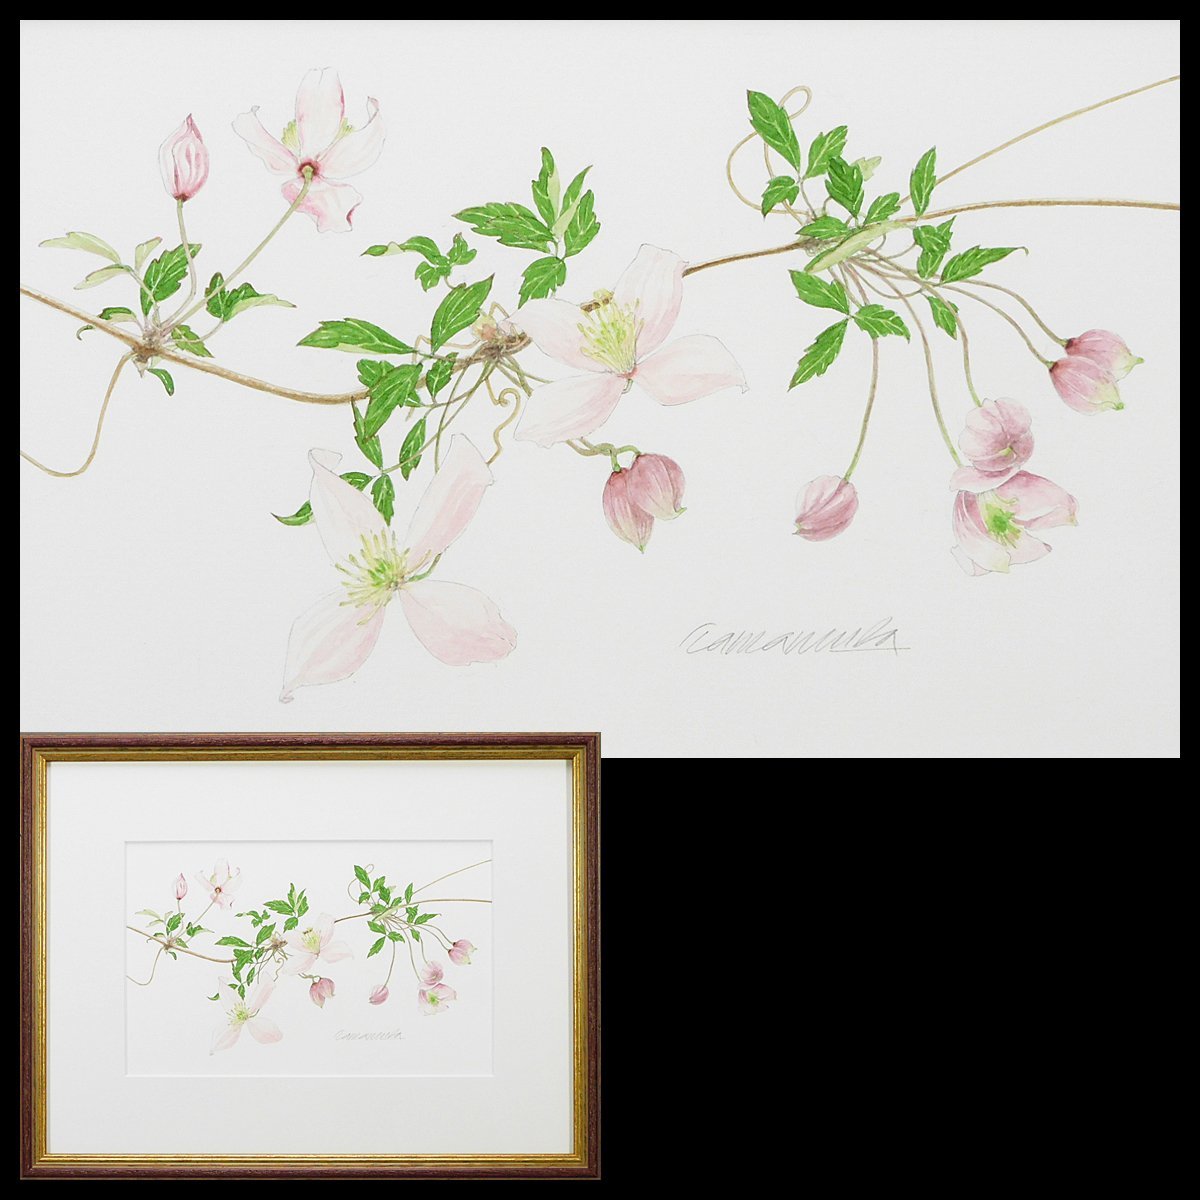 Toyoo Tamamura Clematis montana watercolor painting 2008 Framed dedication Special box Father Katohisa Tamamura Essayist s23070202, painting, watercolor, Nature, Landscape painting